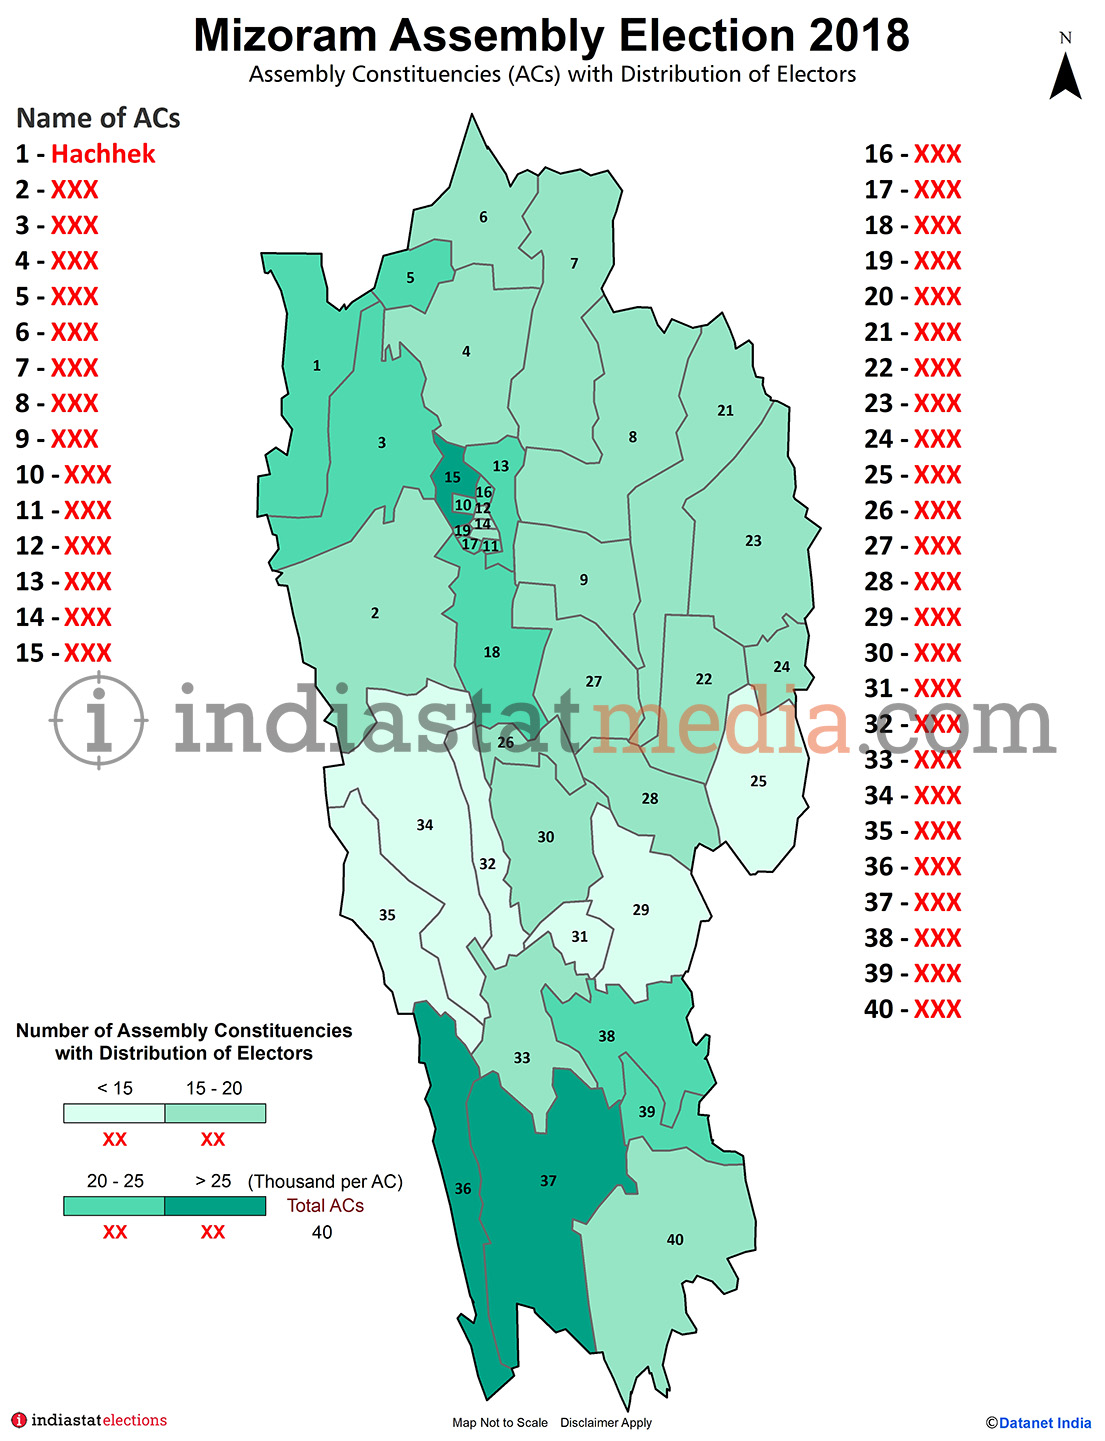 Assembly Constituencies (ACs) with Distribution of Electors in Mizoram (Assembly Election - 2018)